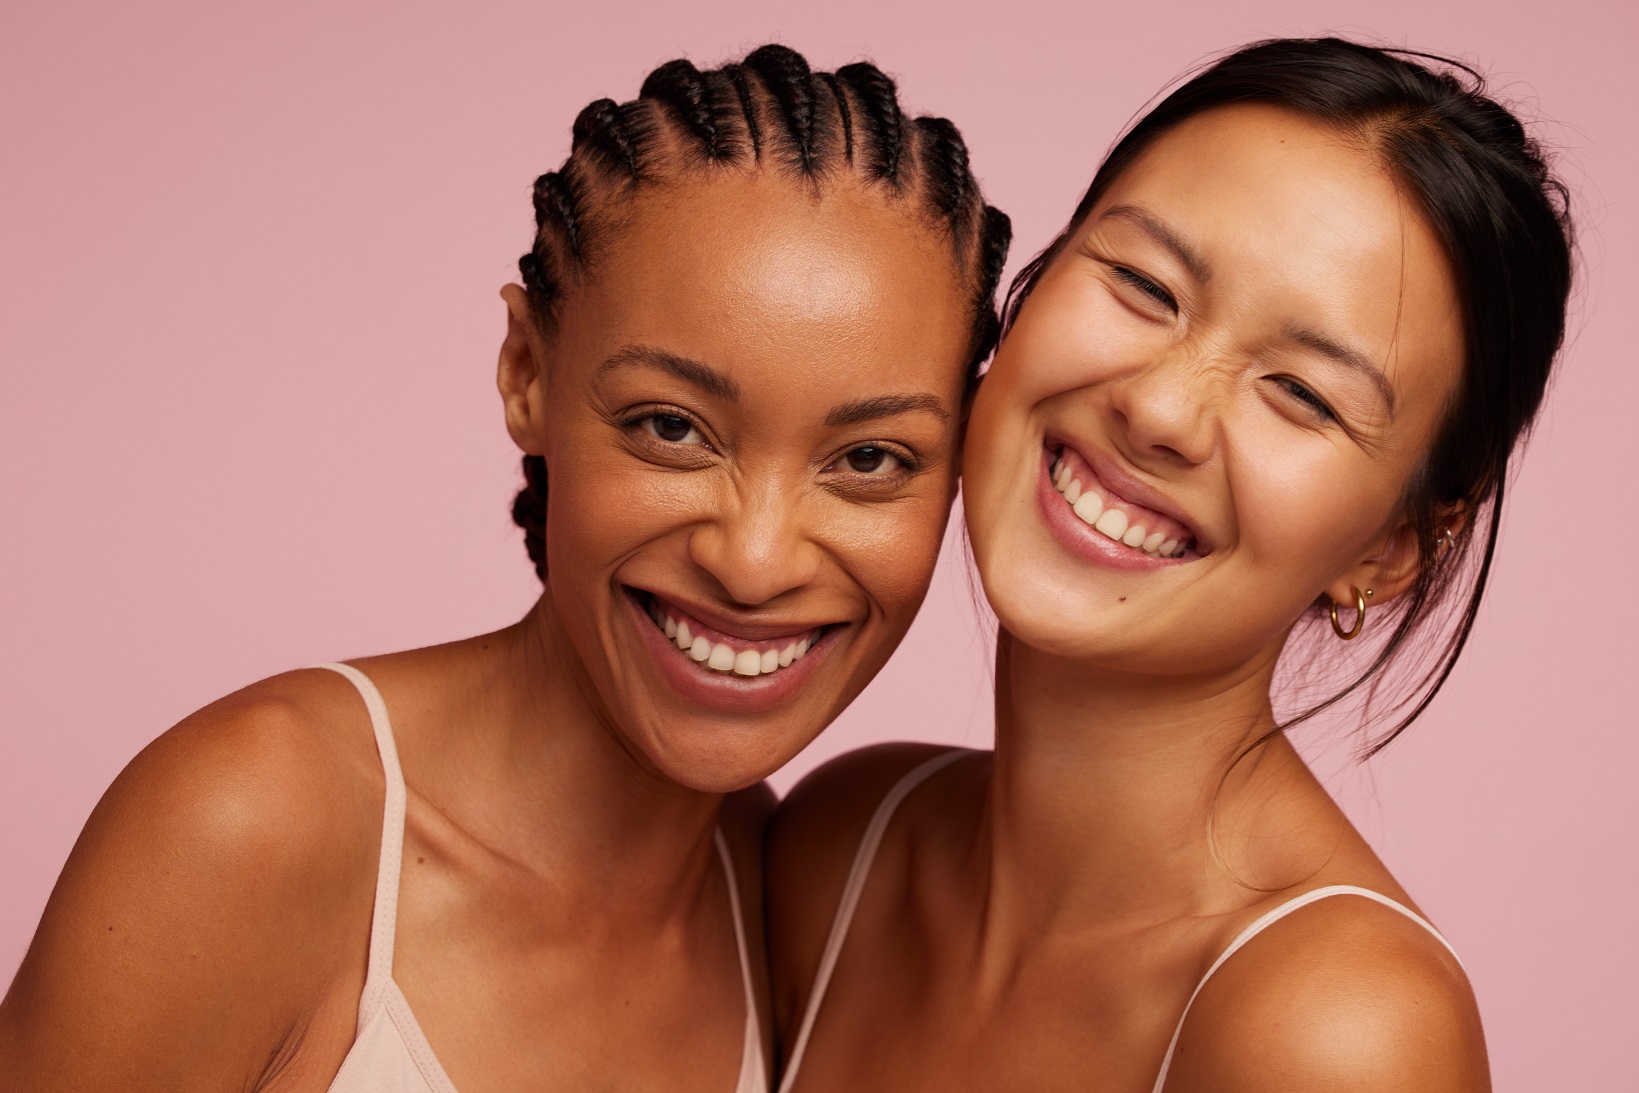 Asian and African Beautiful Smiling Woman | Avail Aesthetics in Wake Forest, NC